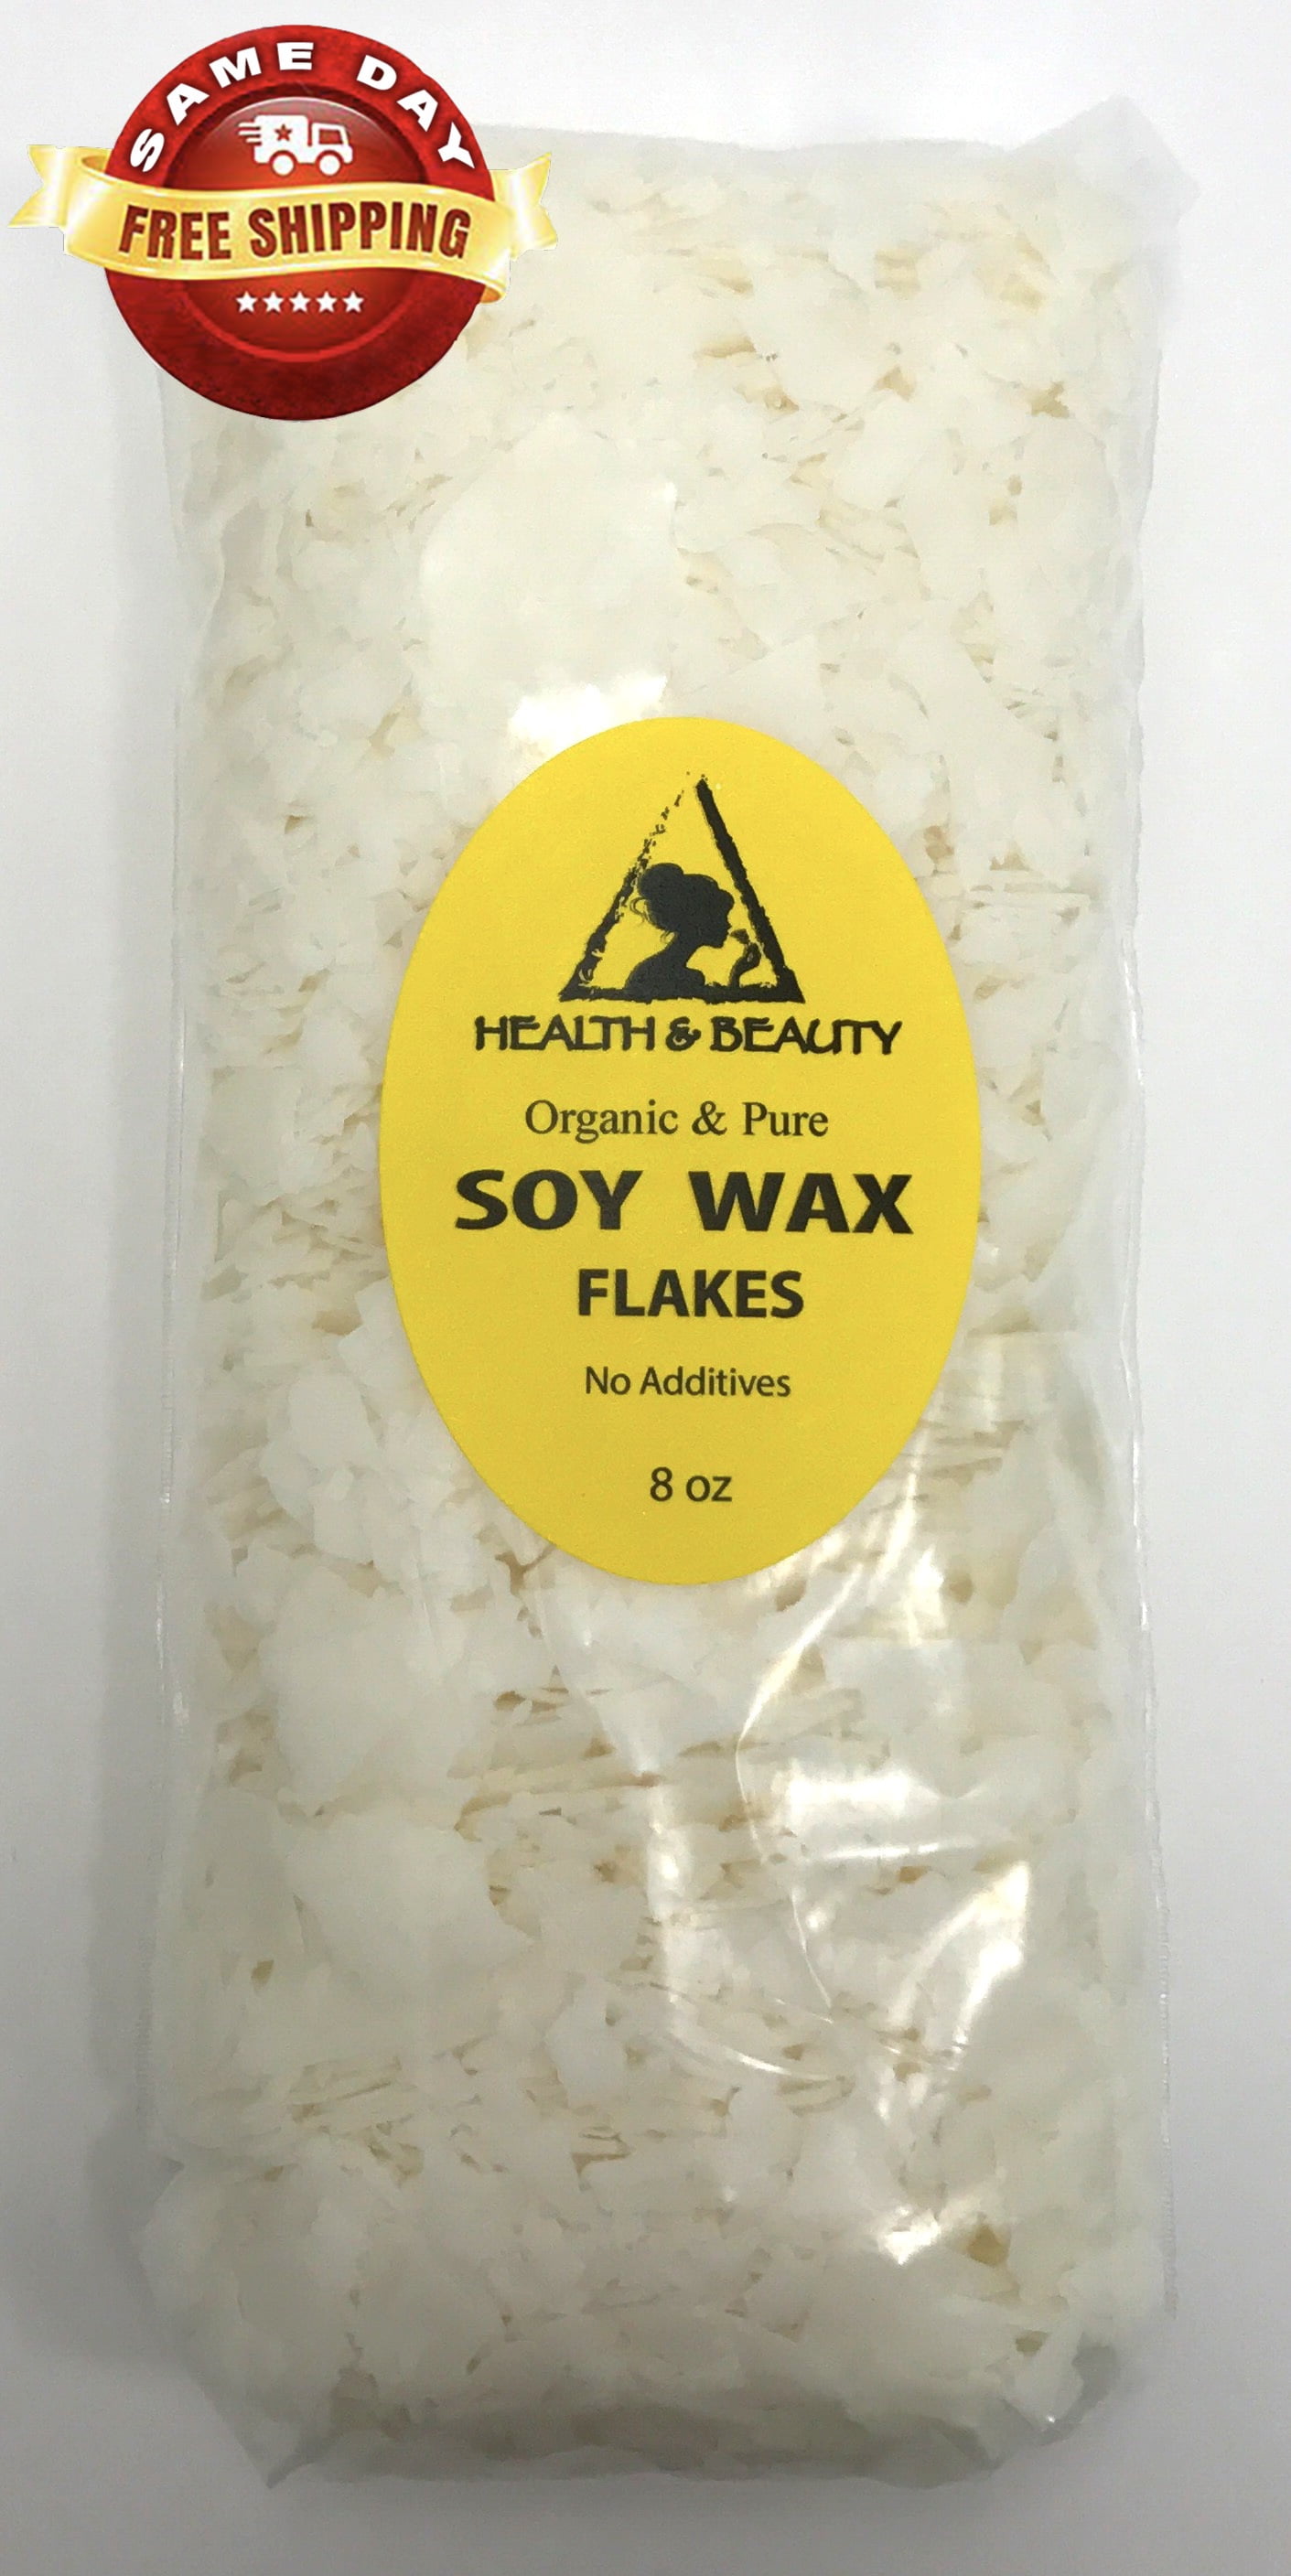 Soy Wax Flakes in Microwavable Container by Make Market®